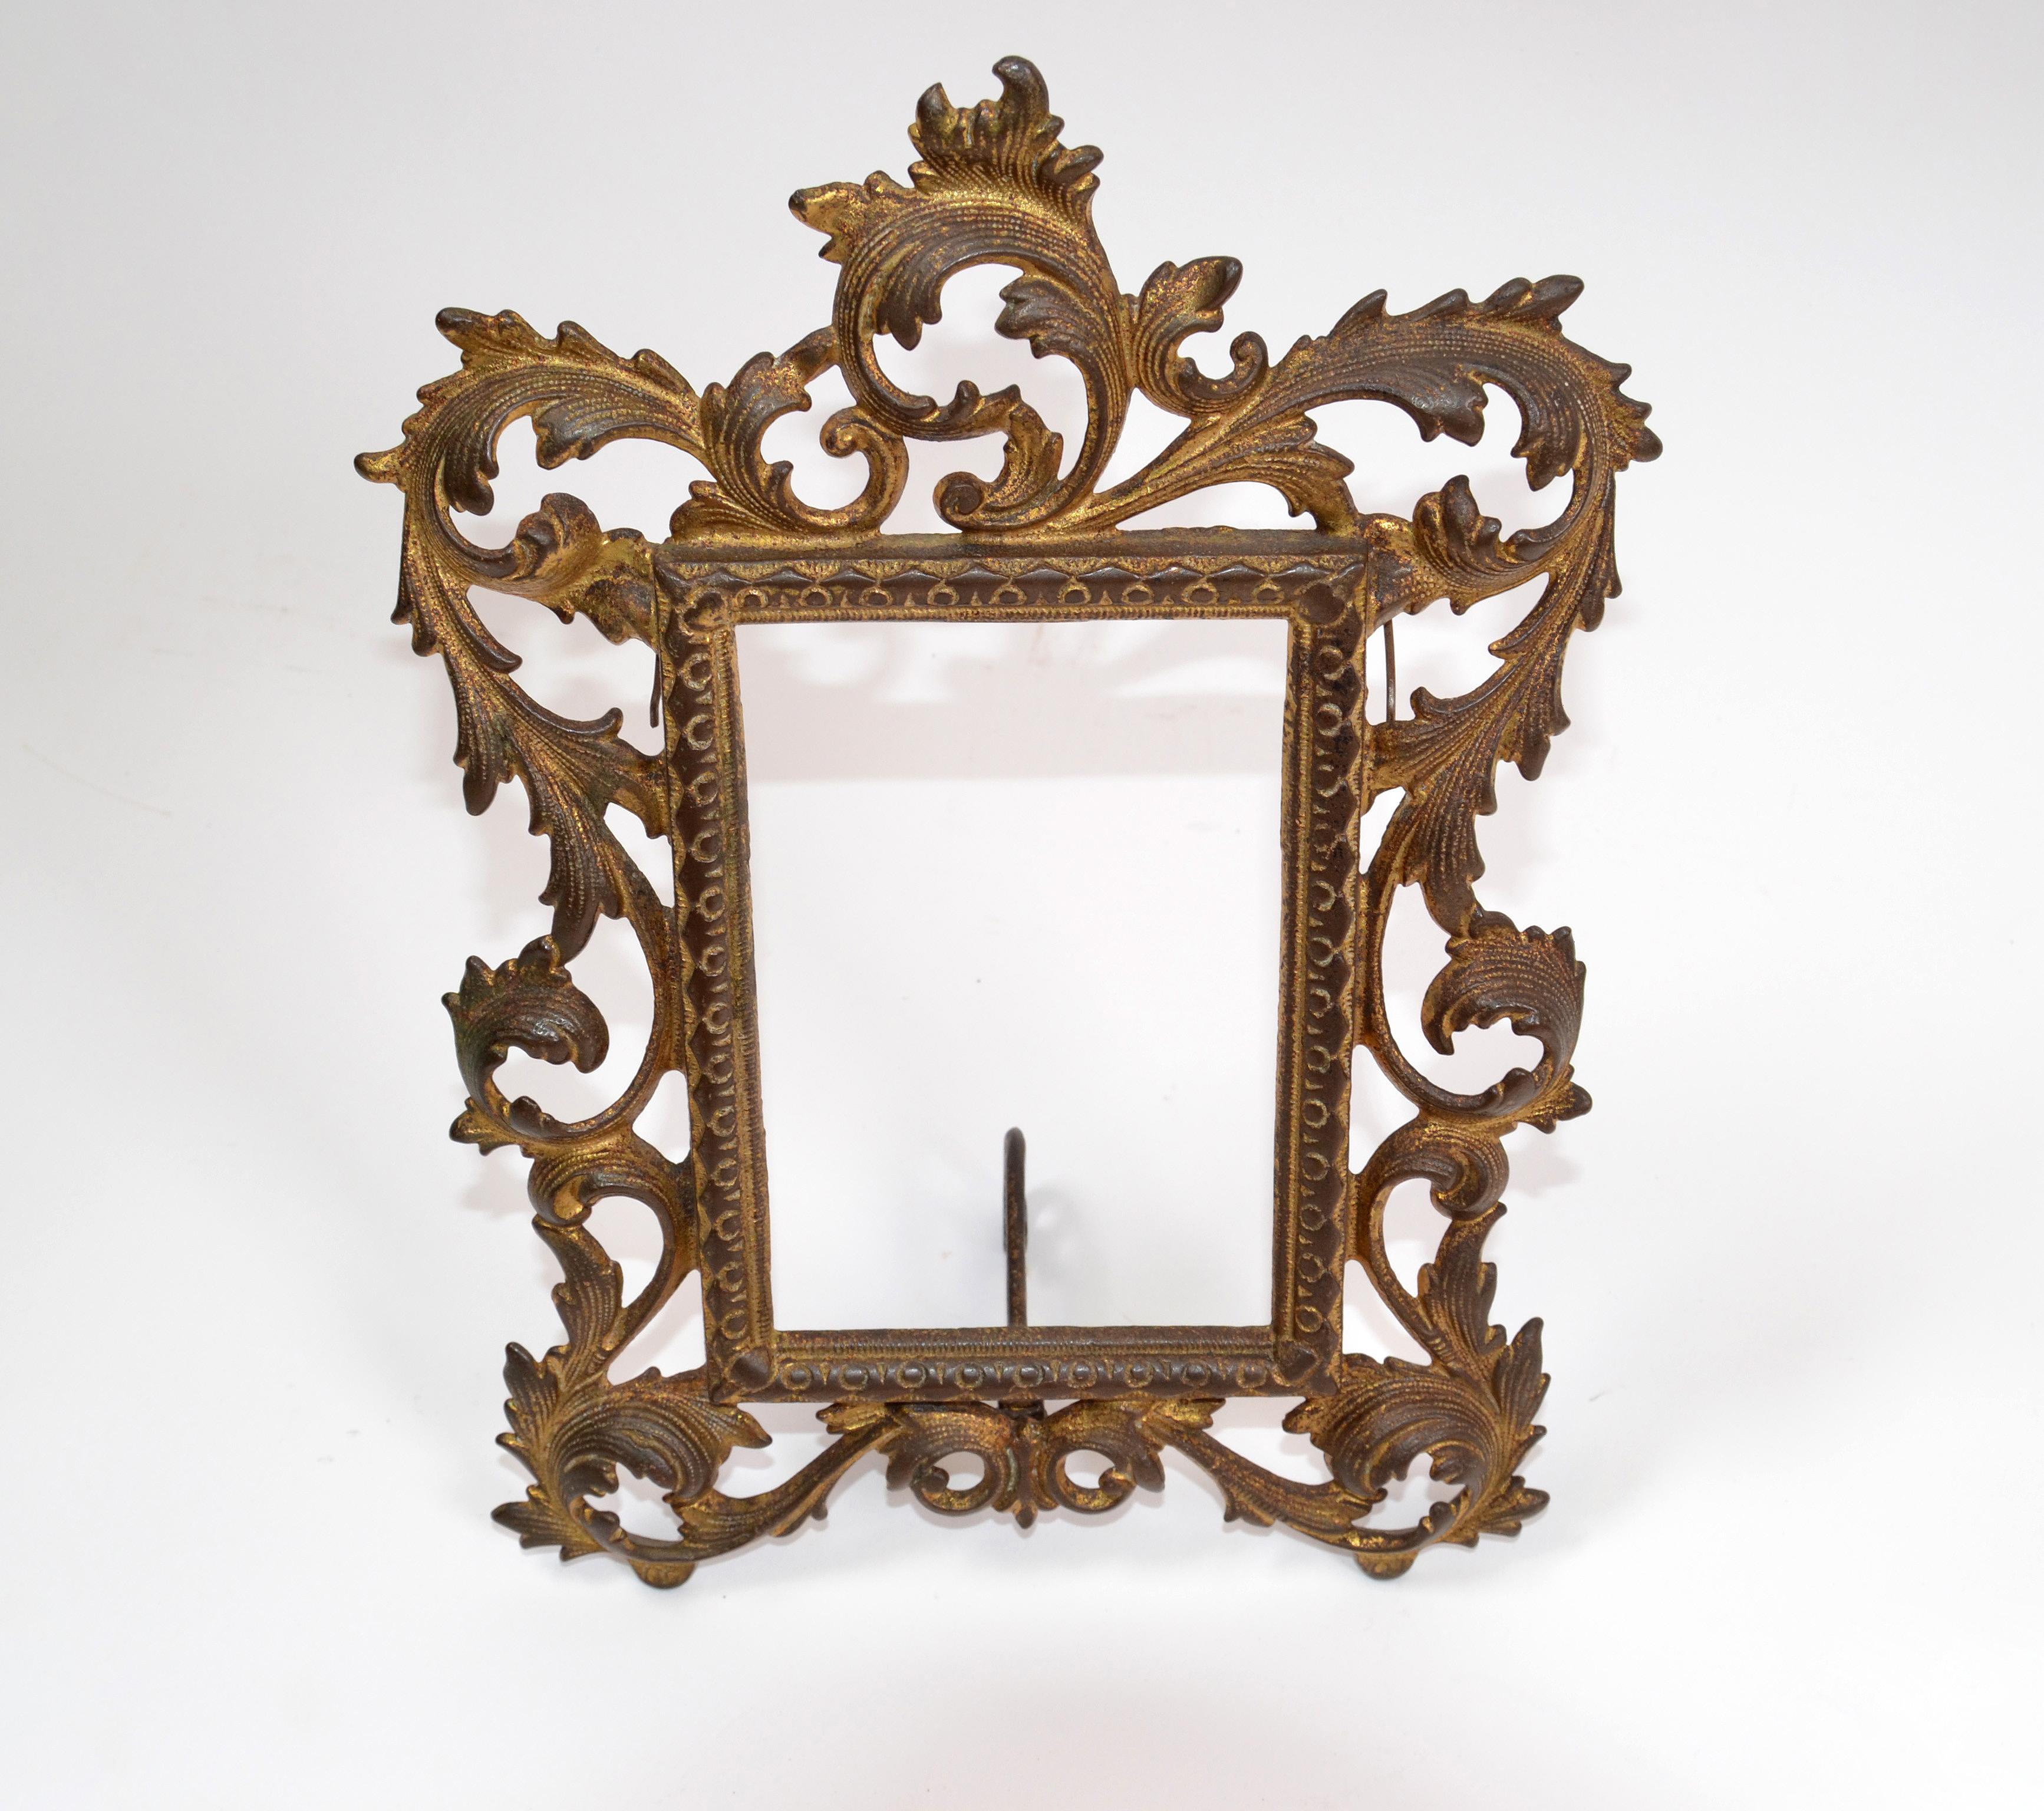 Art Nouveau Whimsical handcrafted golden wrought iron picture frame.
Picture size: 3.5 x 5.25 inches.